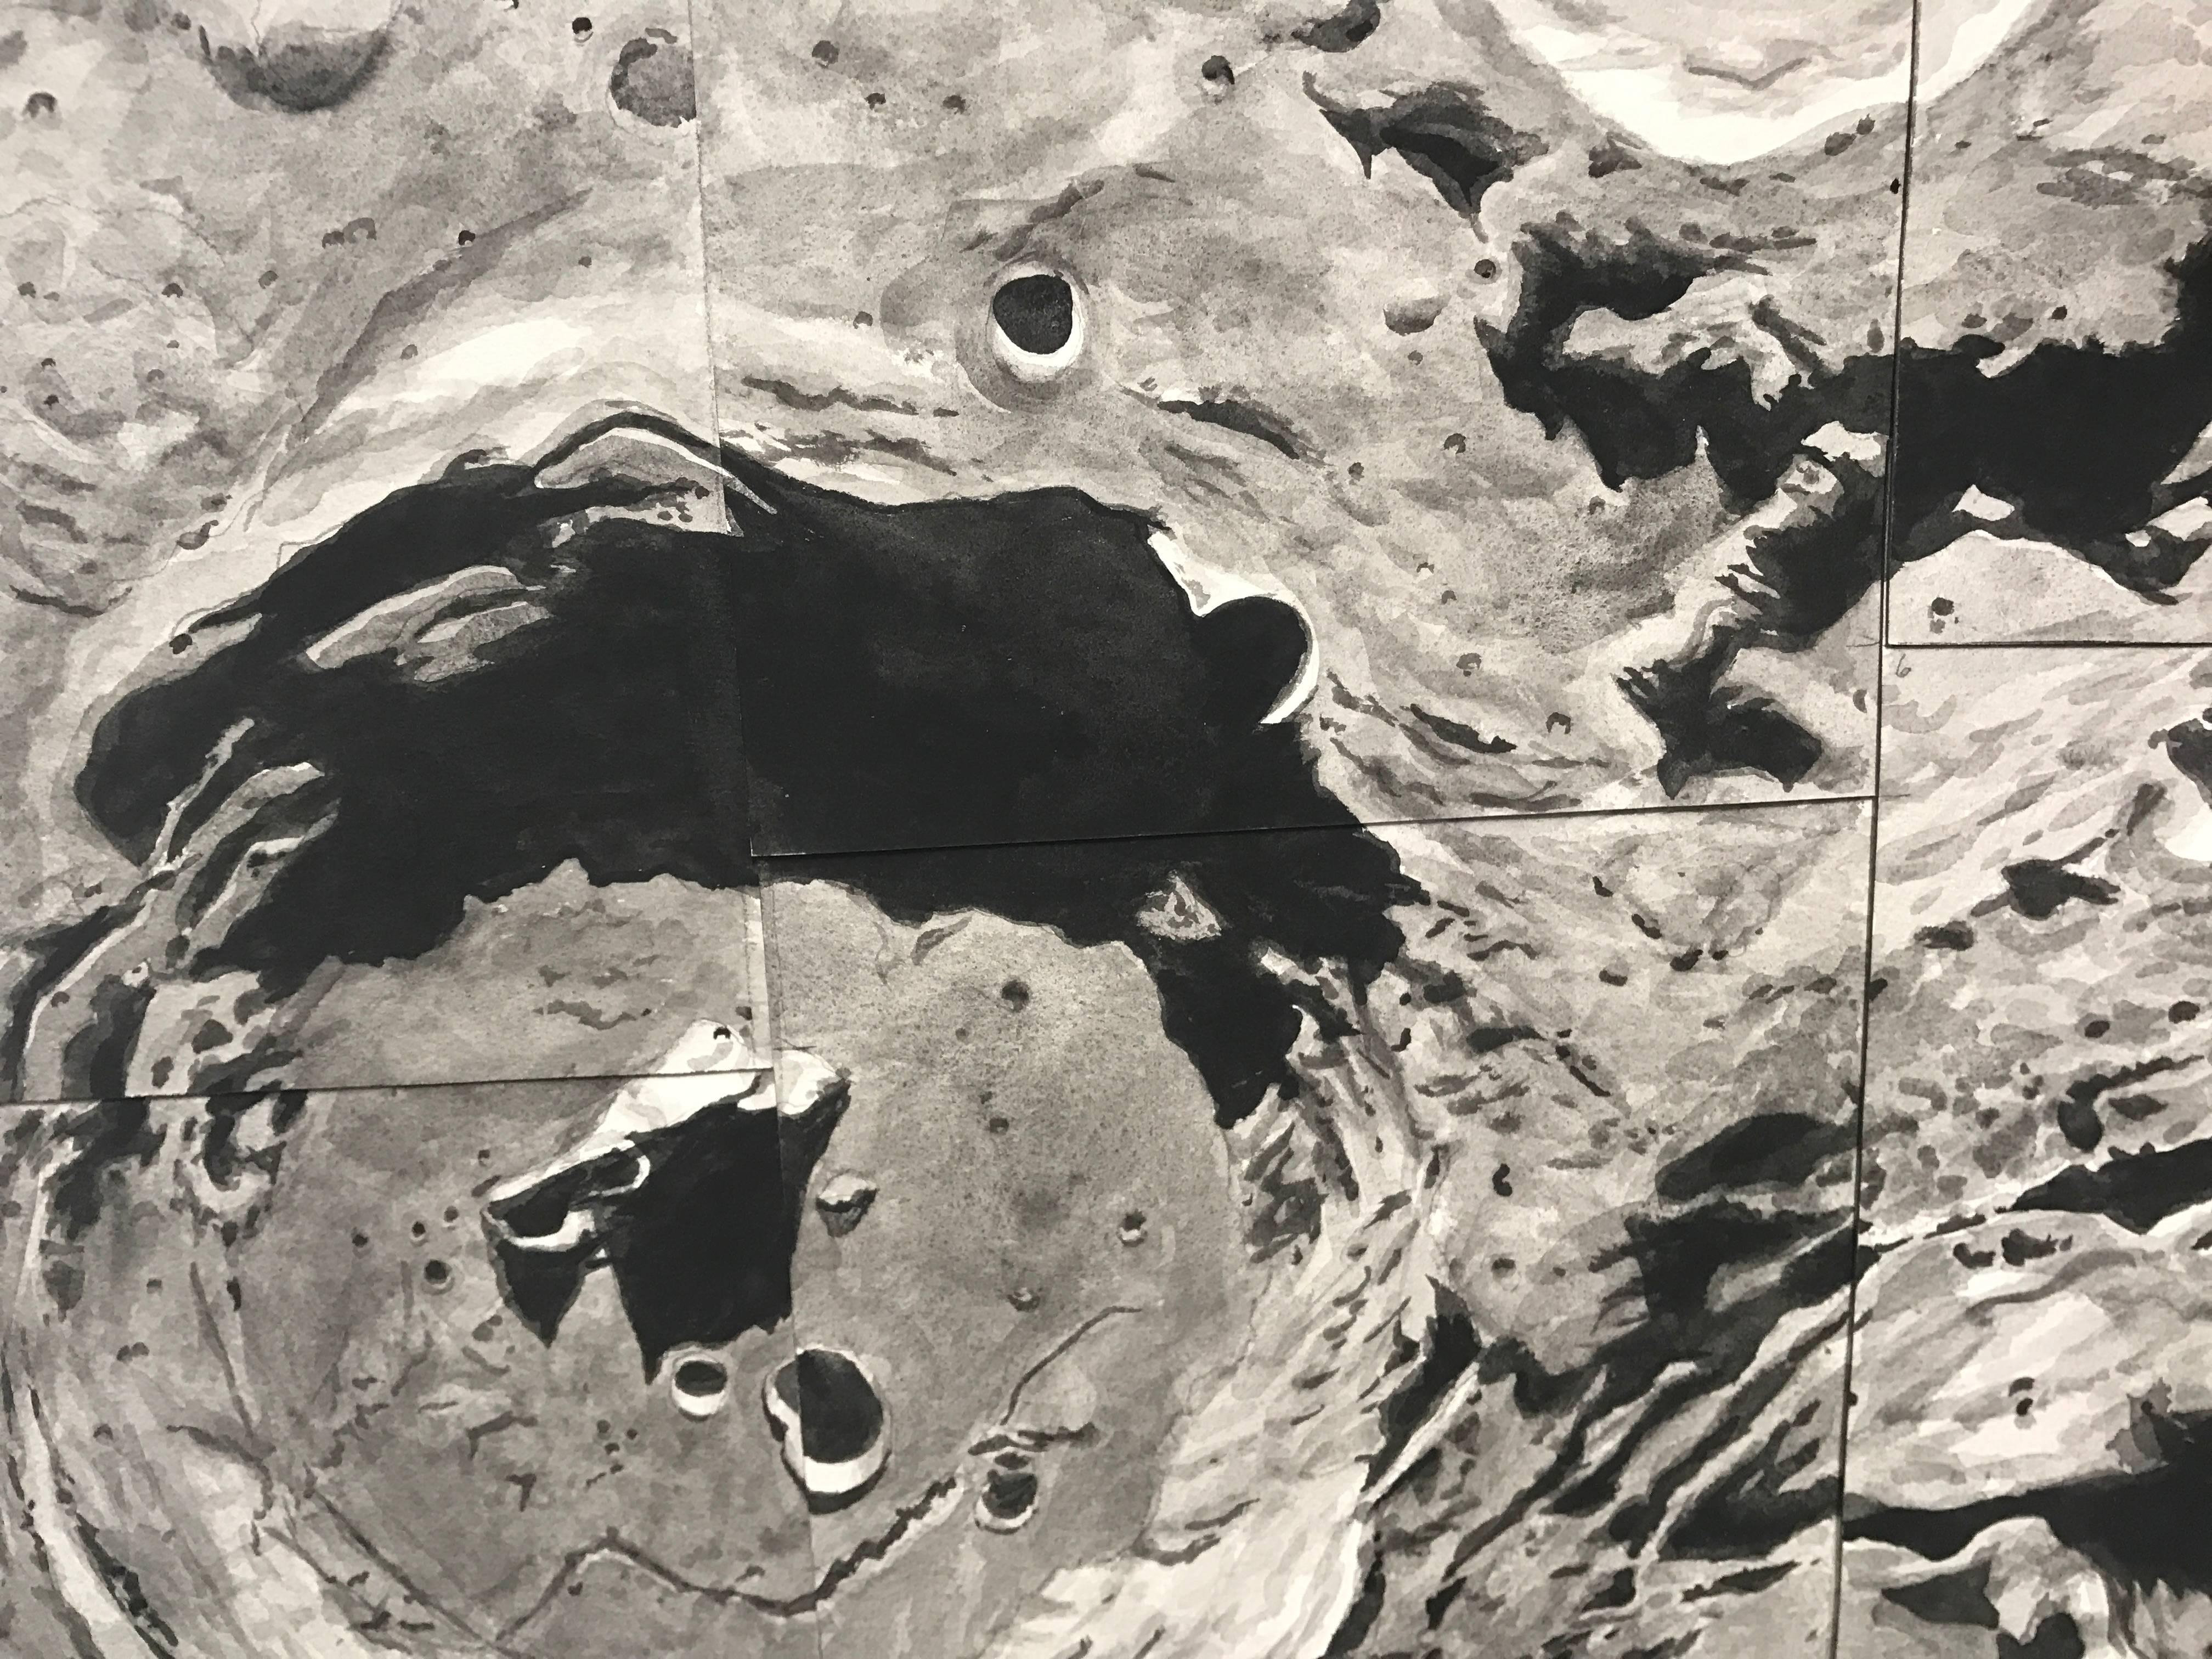 Lunar Crater Chain - Contemporary Painting by Thomas Broadbent